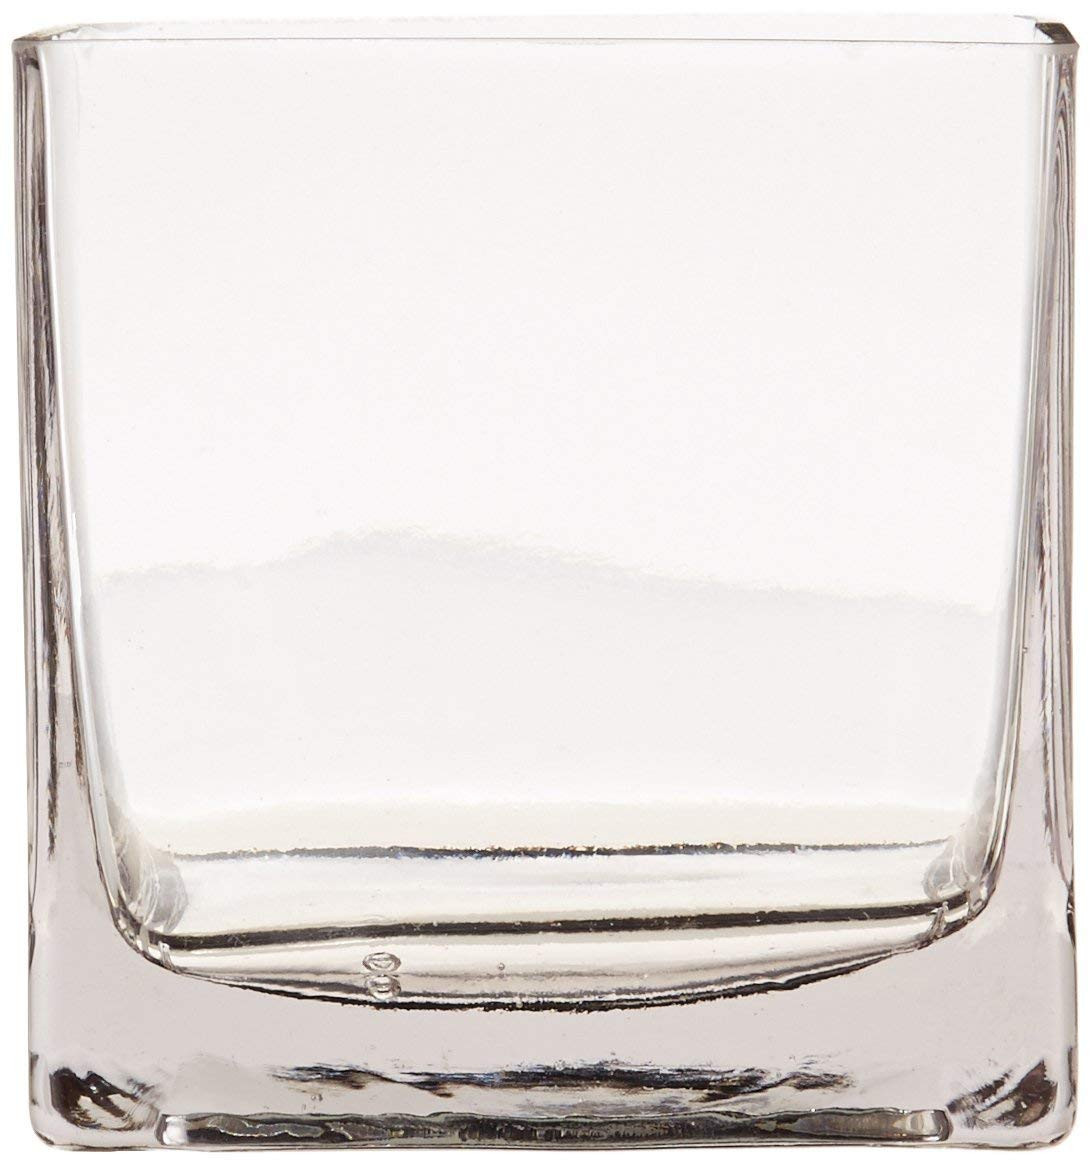 30 Unique Glass Gems Vase Fillers 2024 free download glass gems vase fillers of buy cys excel 12pc clear square glass vase cube 5 inch 5 x 5 x 5 with buy cys excel 12pc clear square glass vase cube 5 inch 5 x 5 x 5 twelve vases online at low p